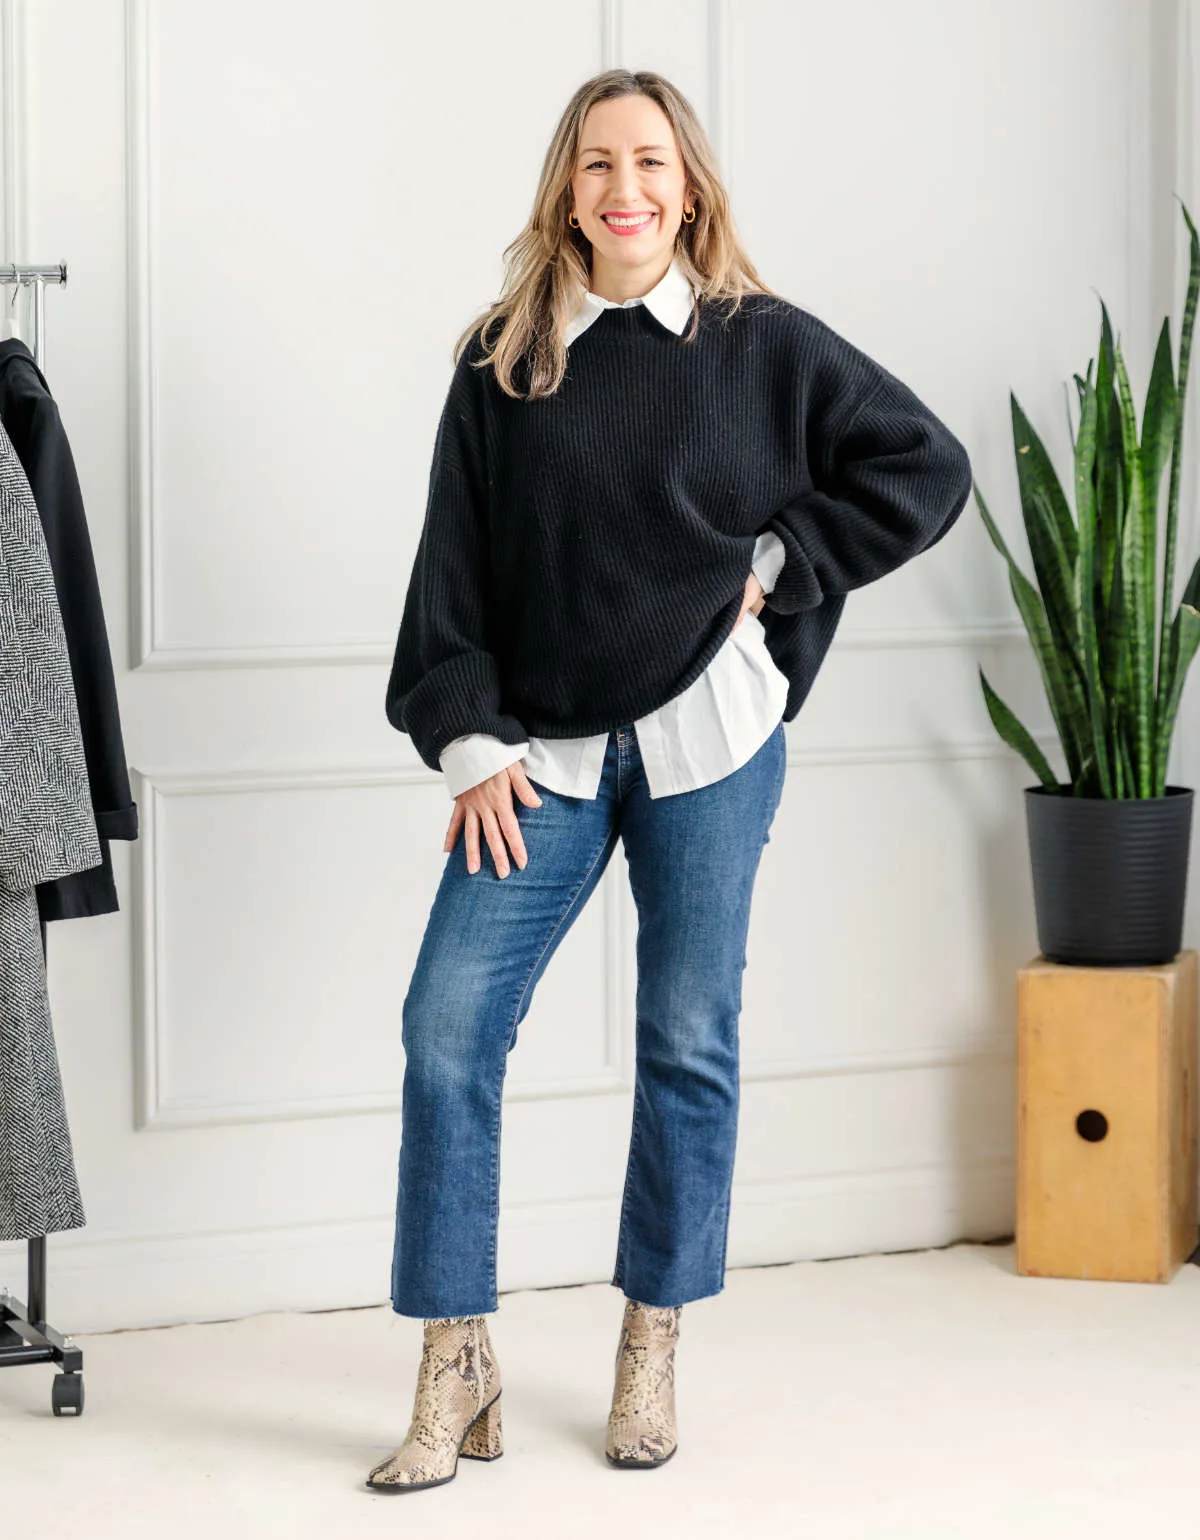 Woman wearing kick flare jeans with ankle boots and black sweater over a white shirt.